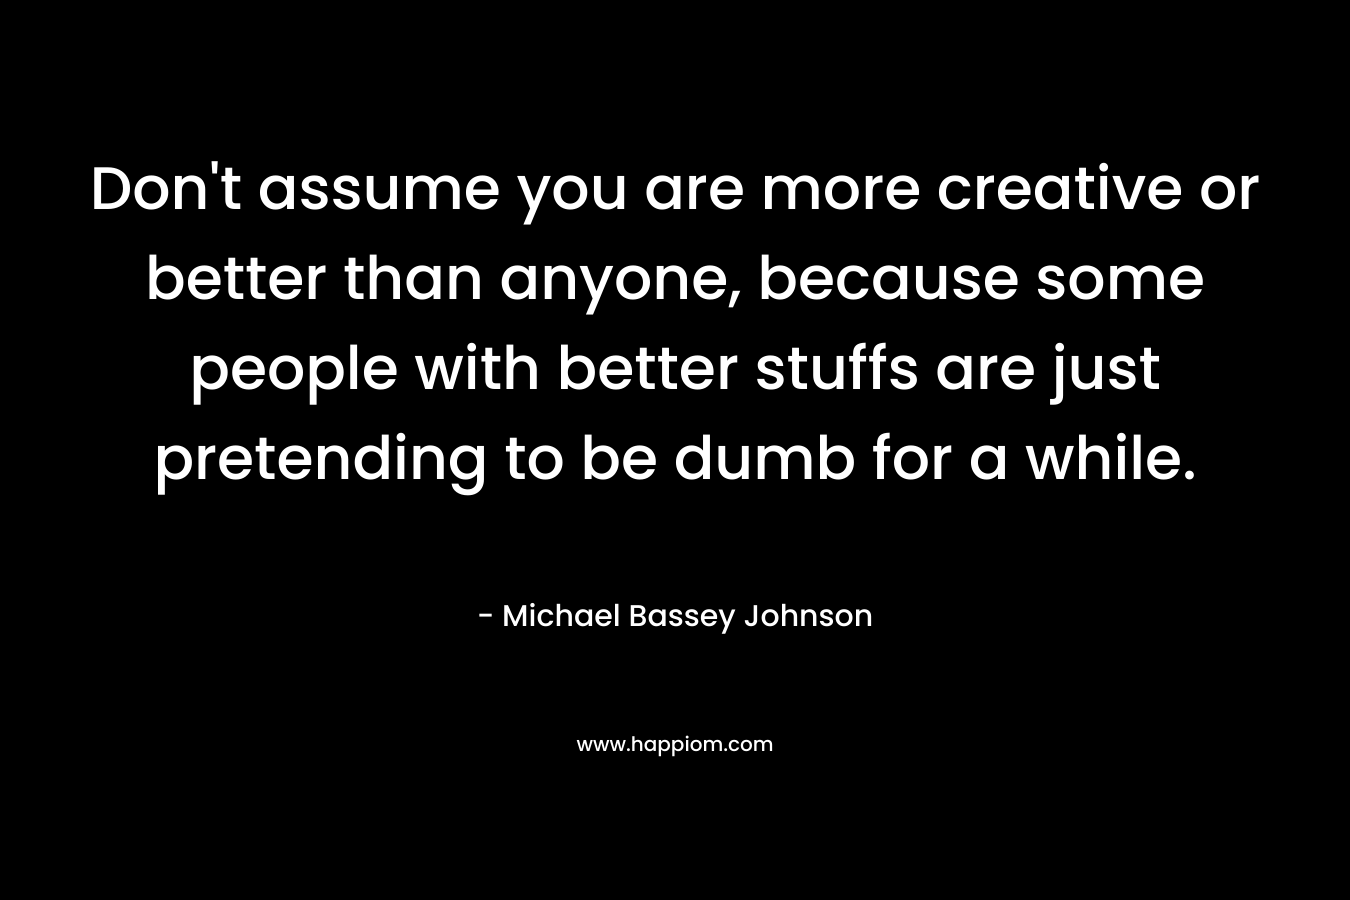 Don't assume you are more creative or better than anyone, because some people with better stuffs are just pretending to be dumb for a while.